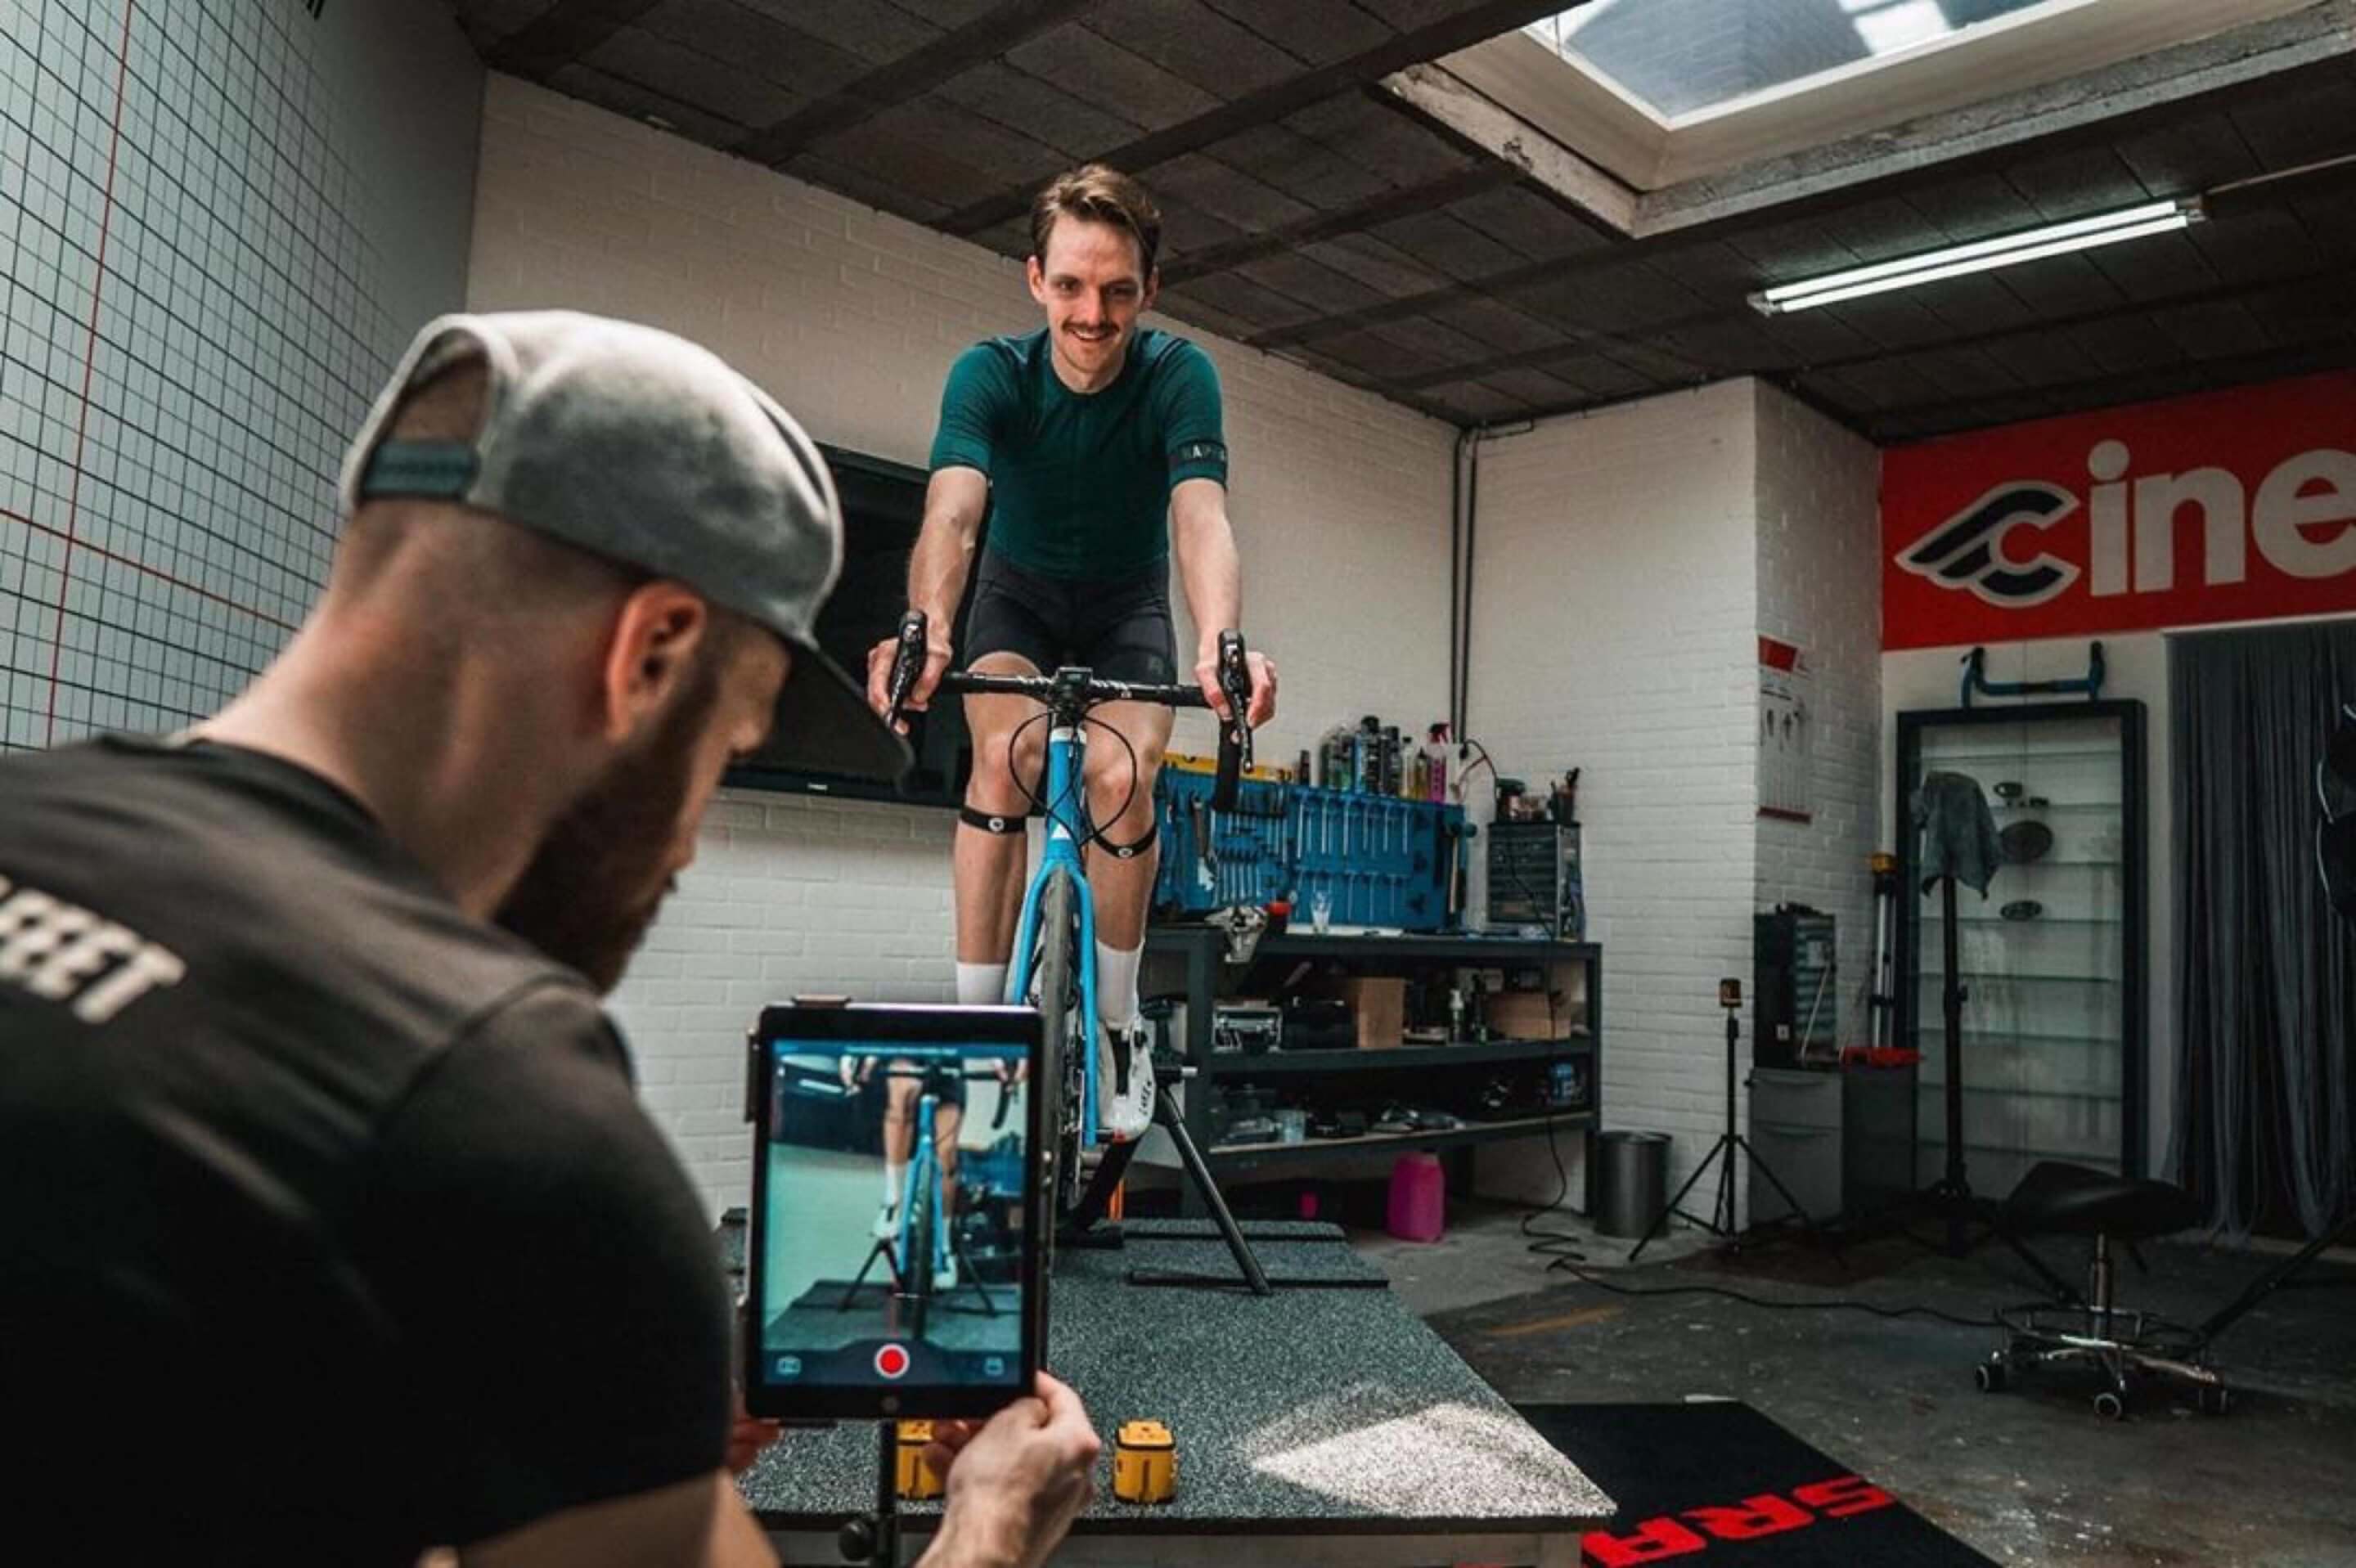 What to Expect in a Bike BikeFit